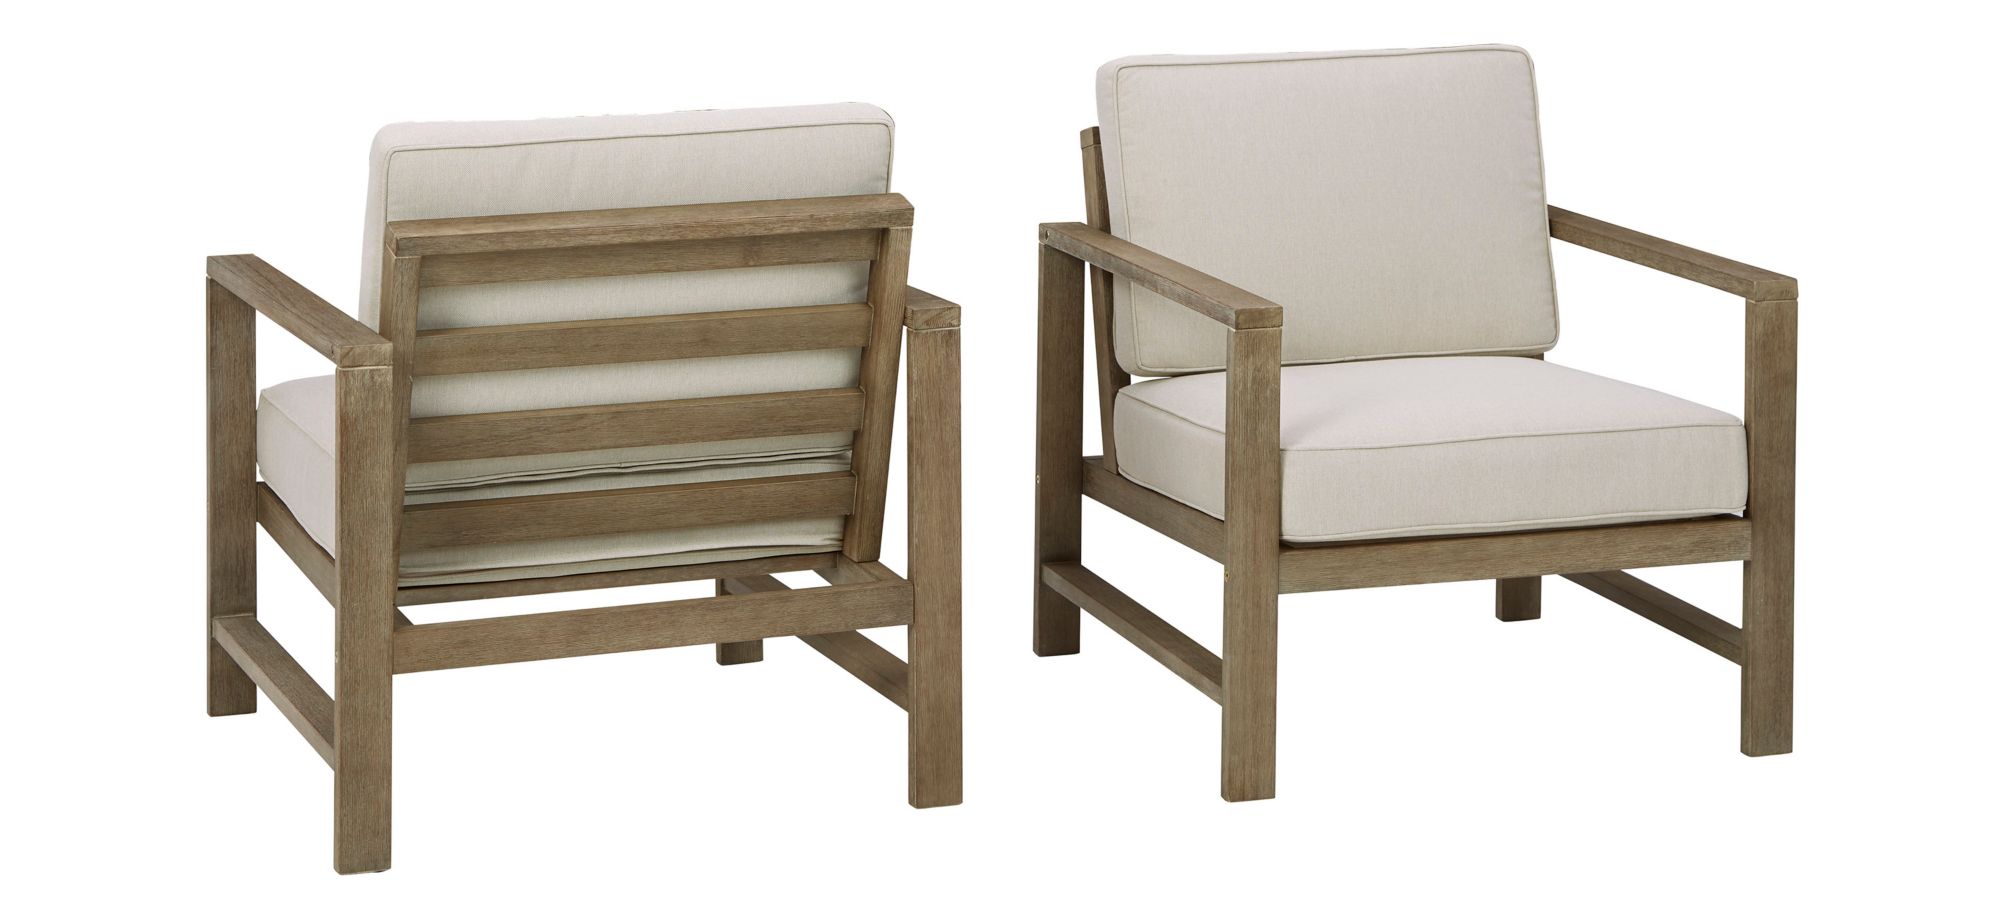 Fynnegan Outdoor Lounge Chair with Cushion - Set of 2 in Stone by Ashley Furniture